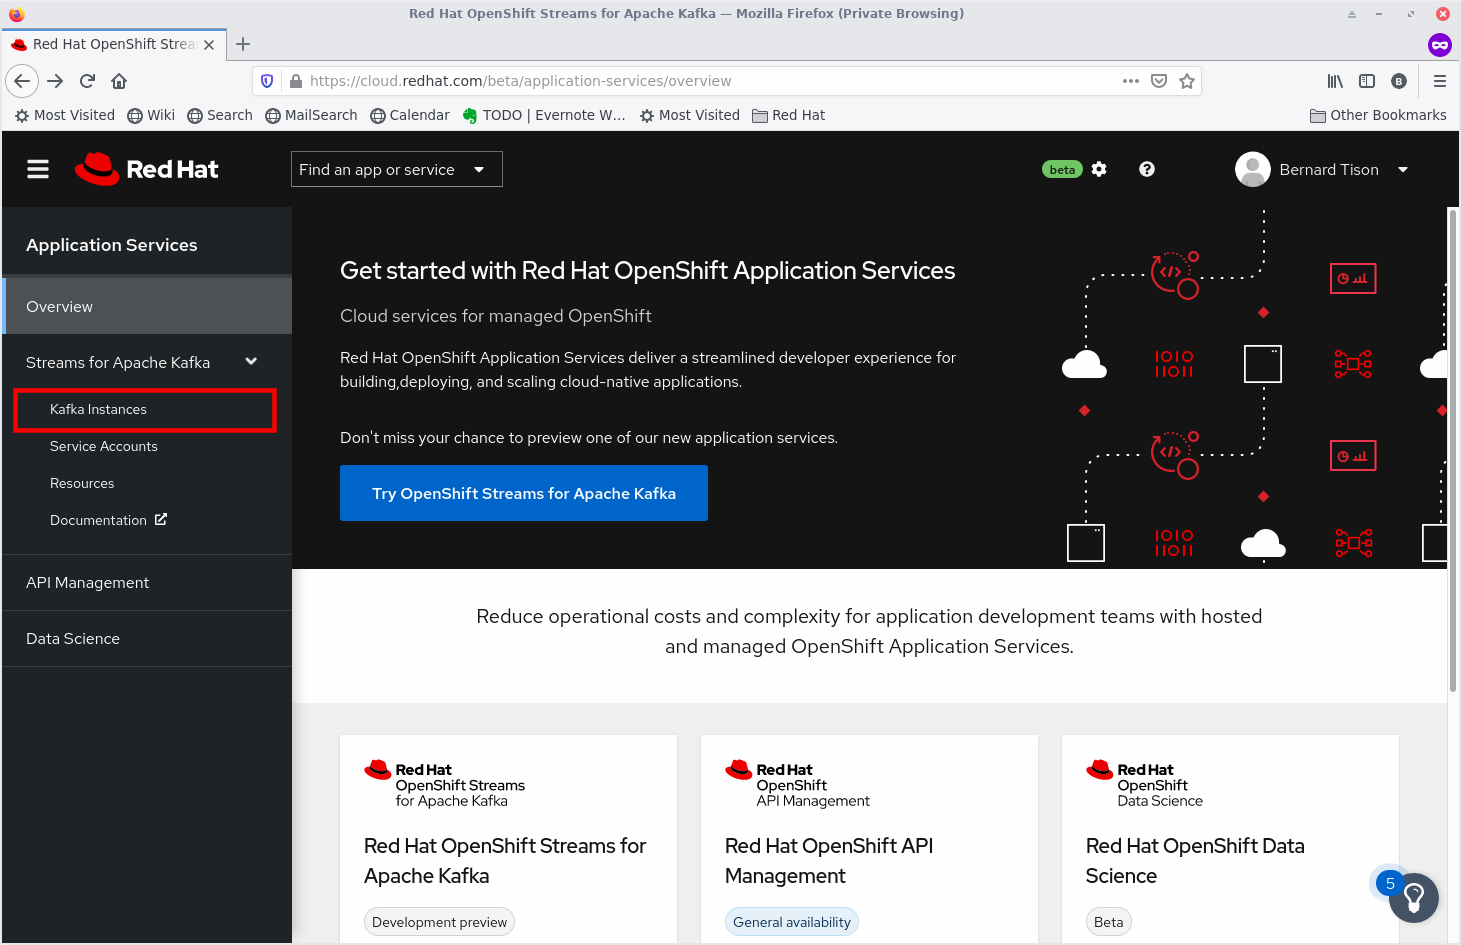 The Application Services landing page on cloud.redhat.com.